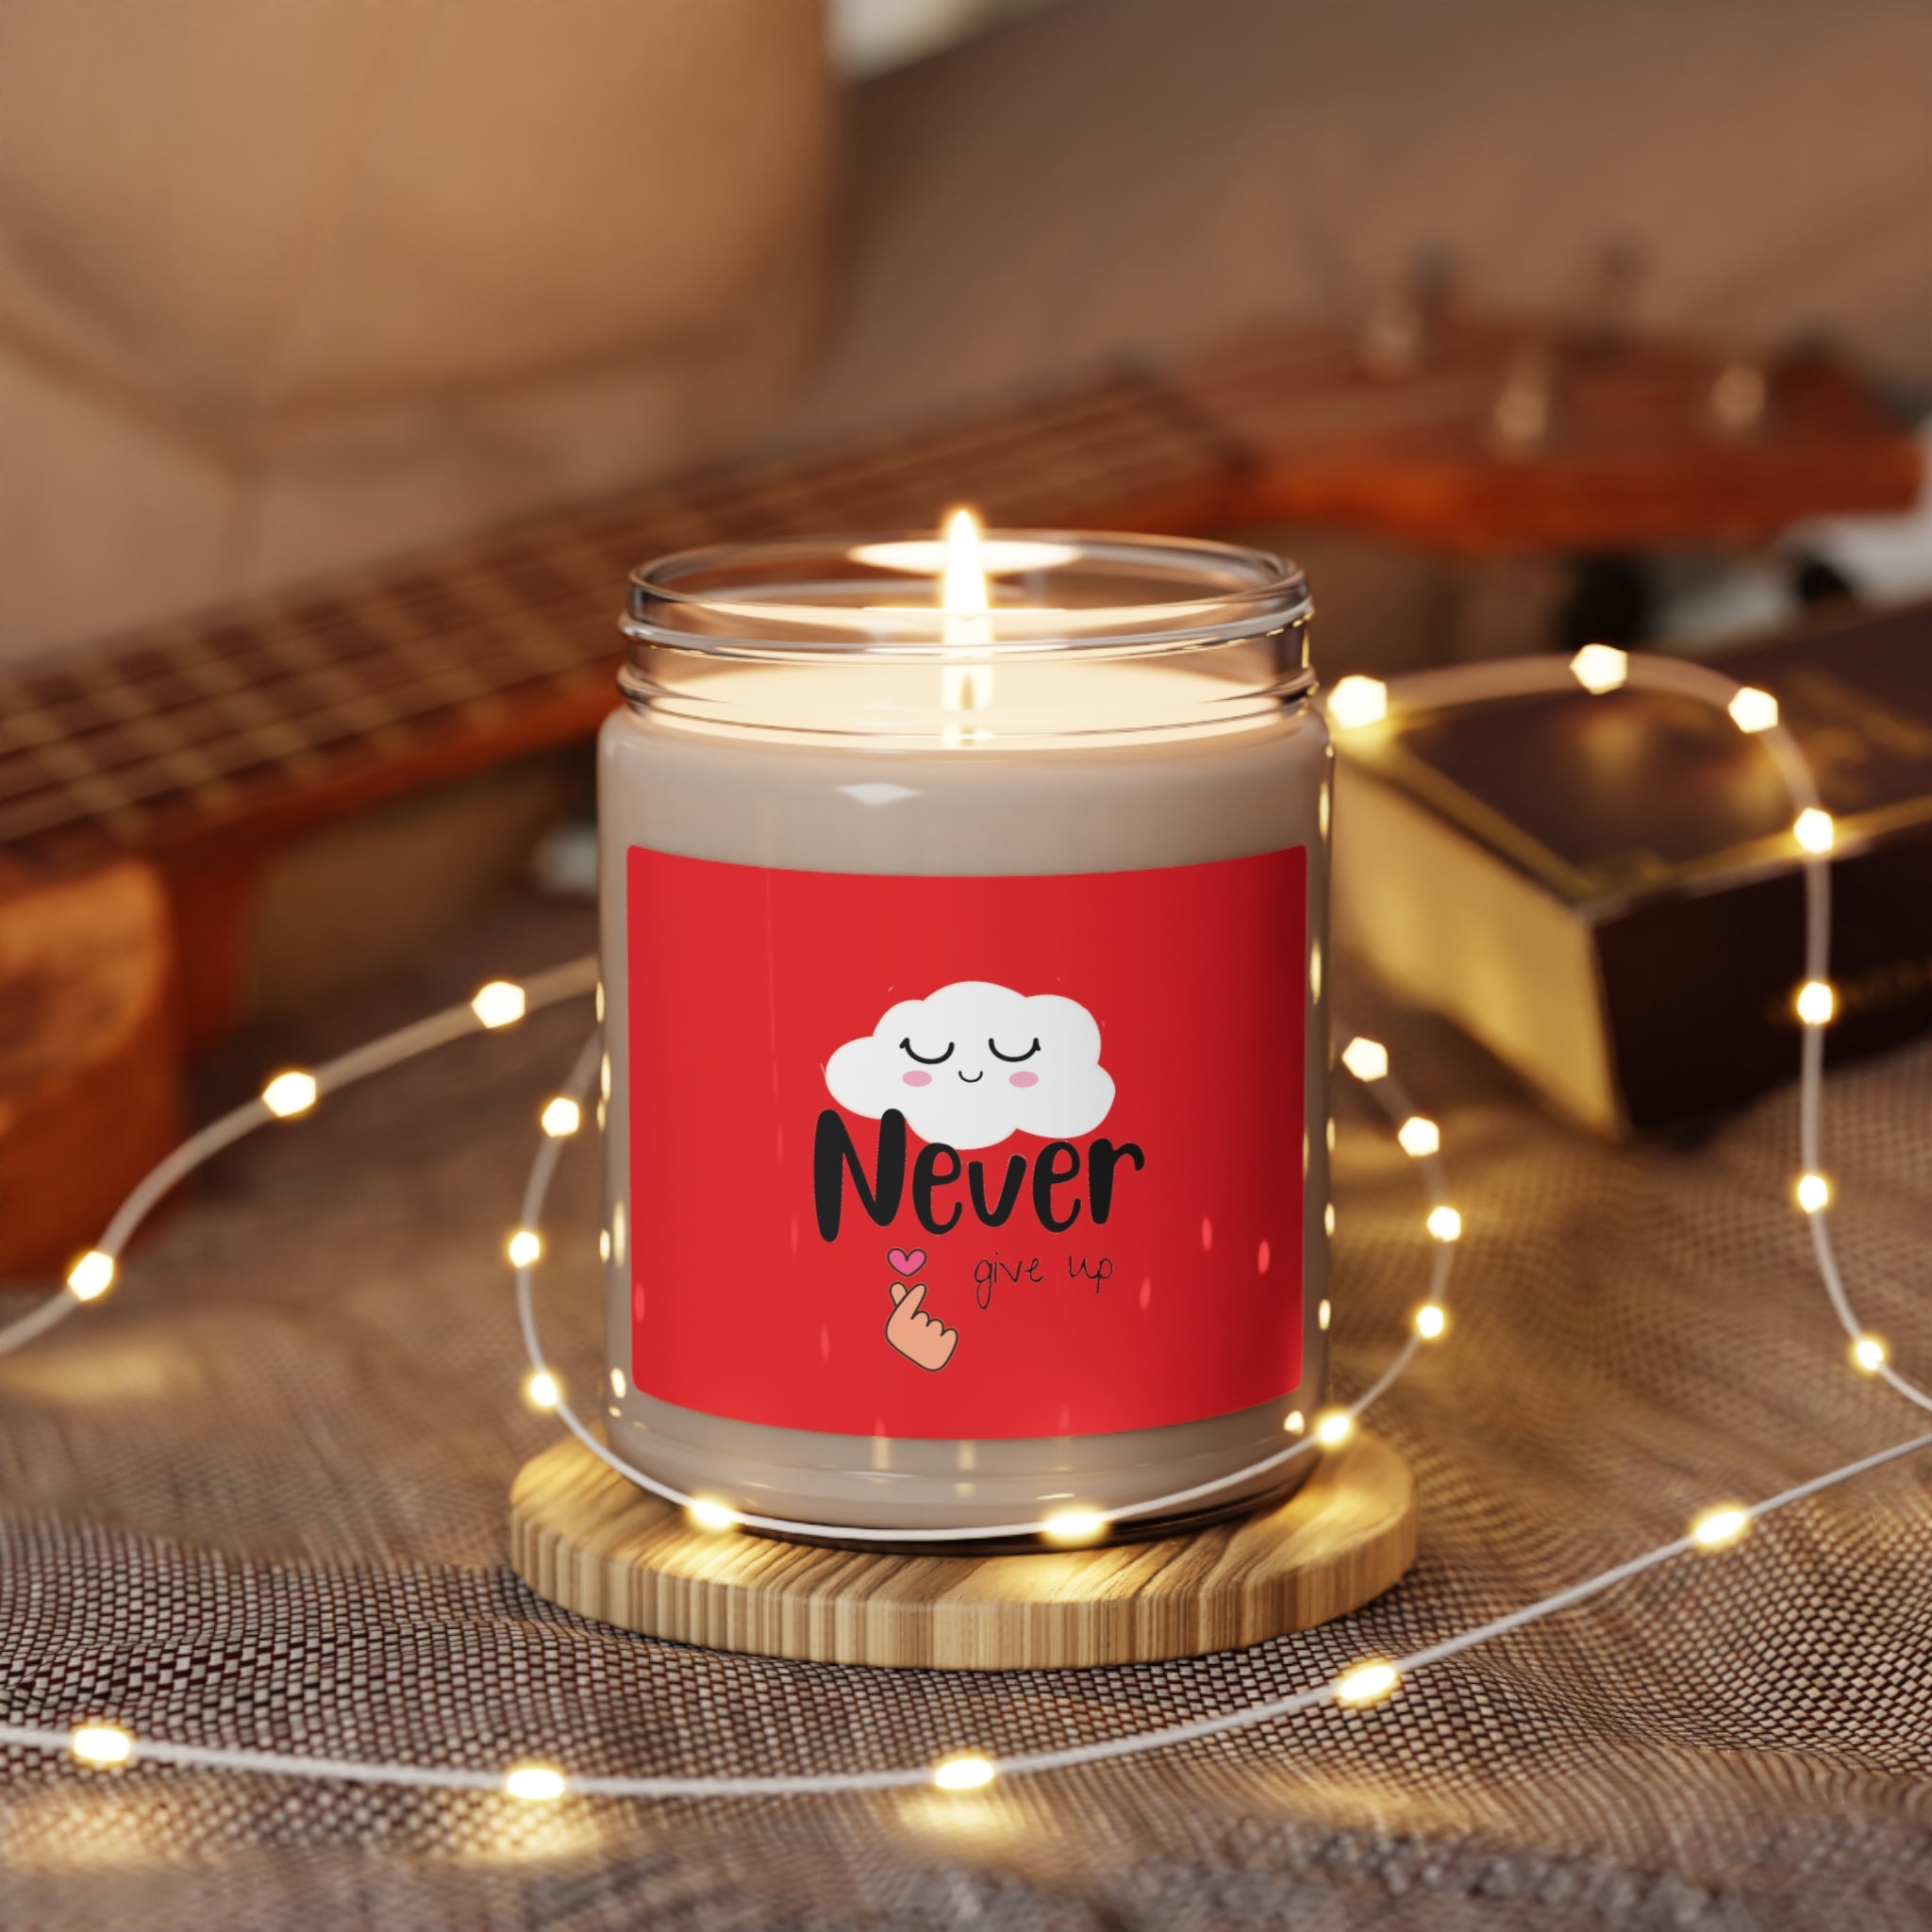 Never give up -- Scented Soy Candle, 9oz